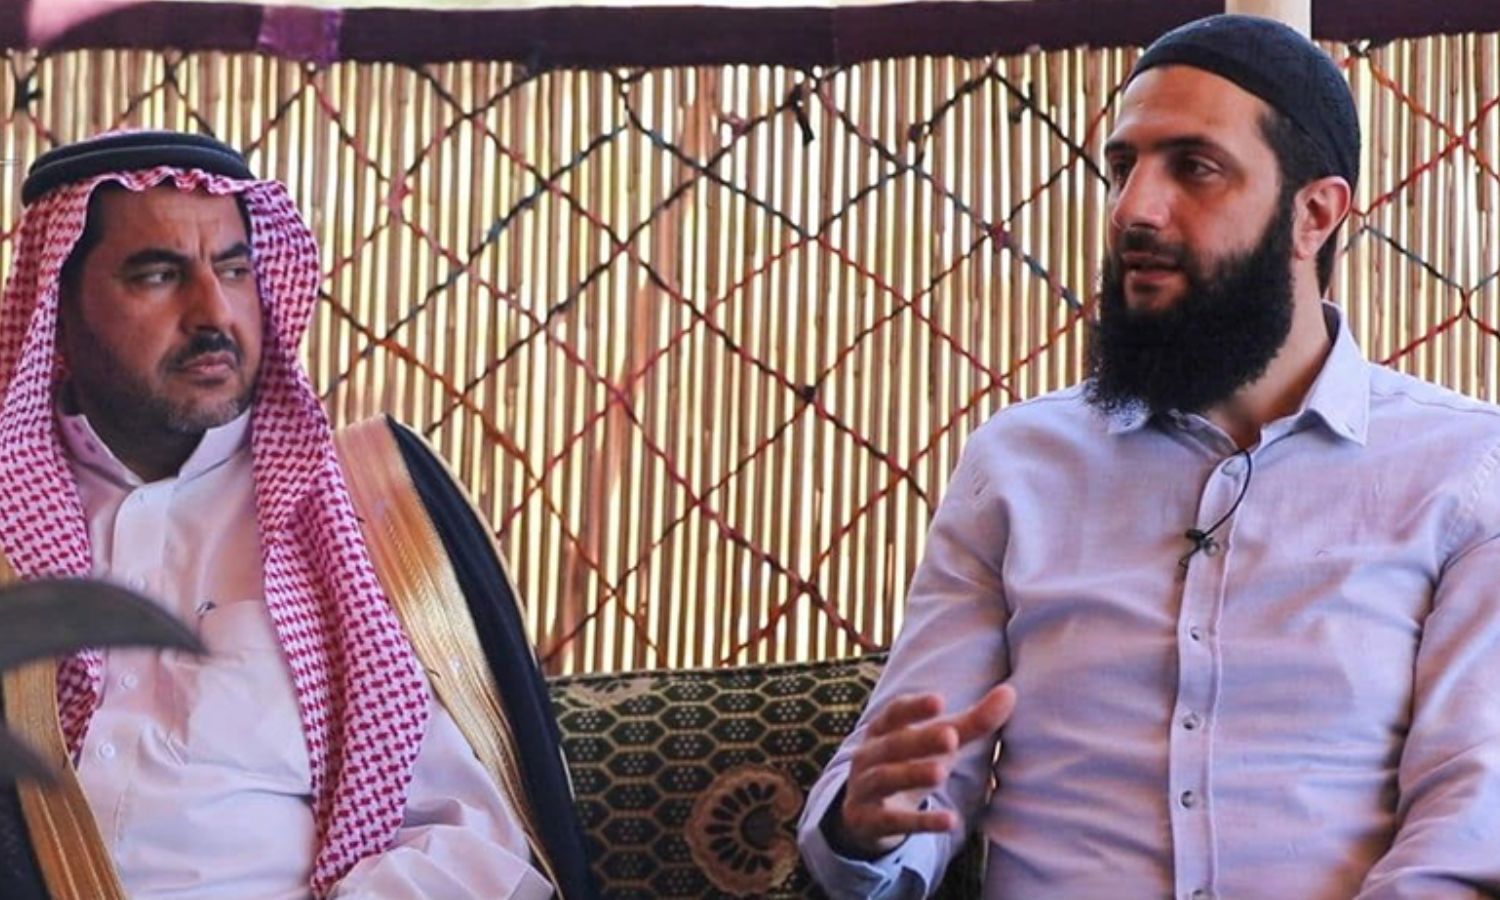 Abu Mohammad al-Jolani, HTS leader, in a meeting with tribal figures in Eid al-Fitr holiday – May 15, 2021 (HTS)